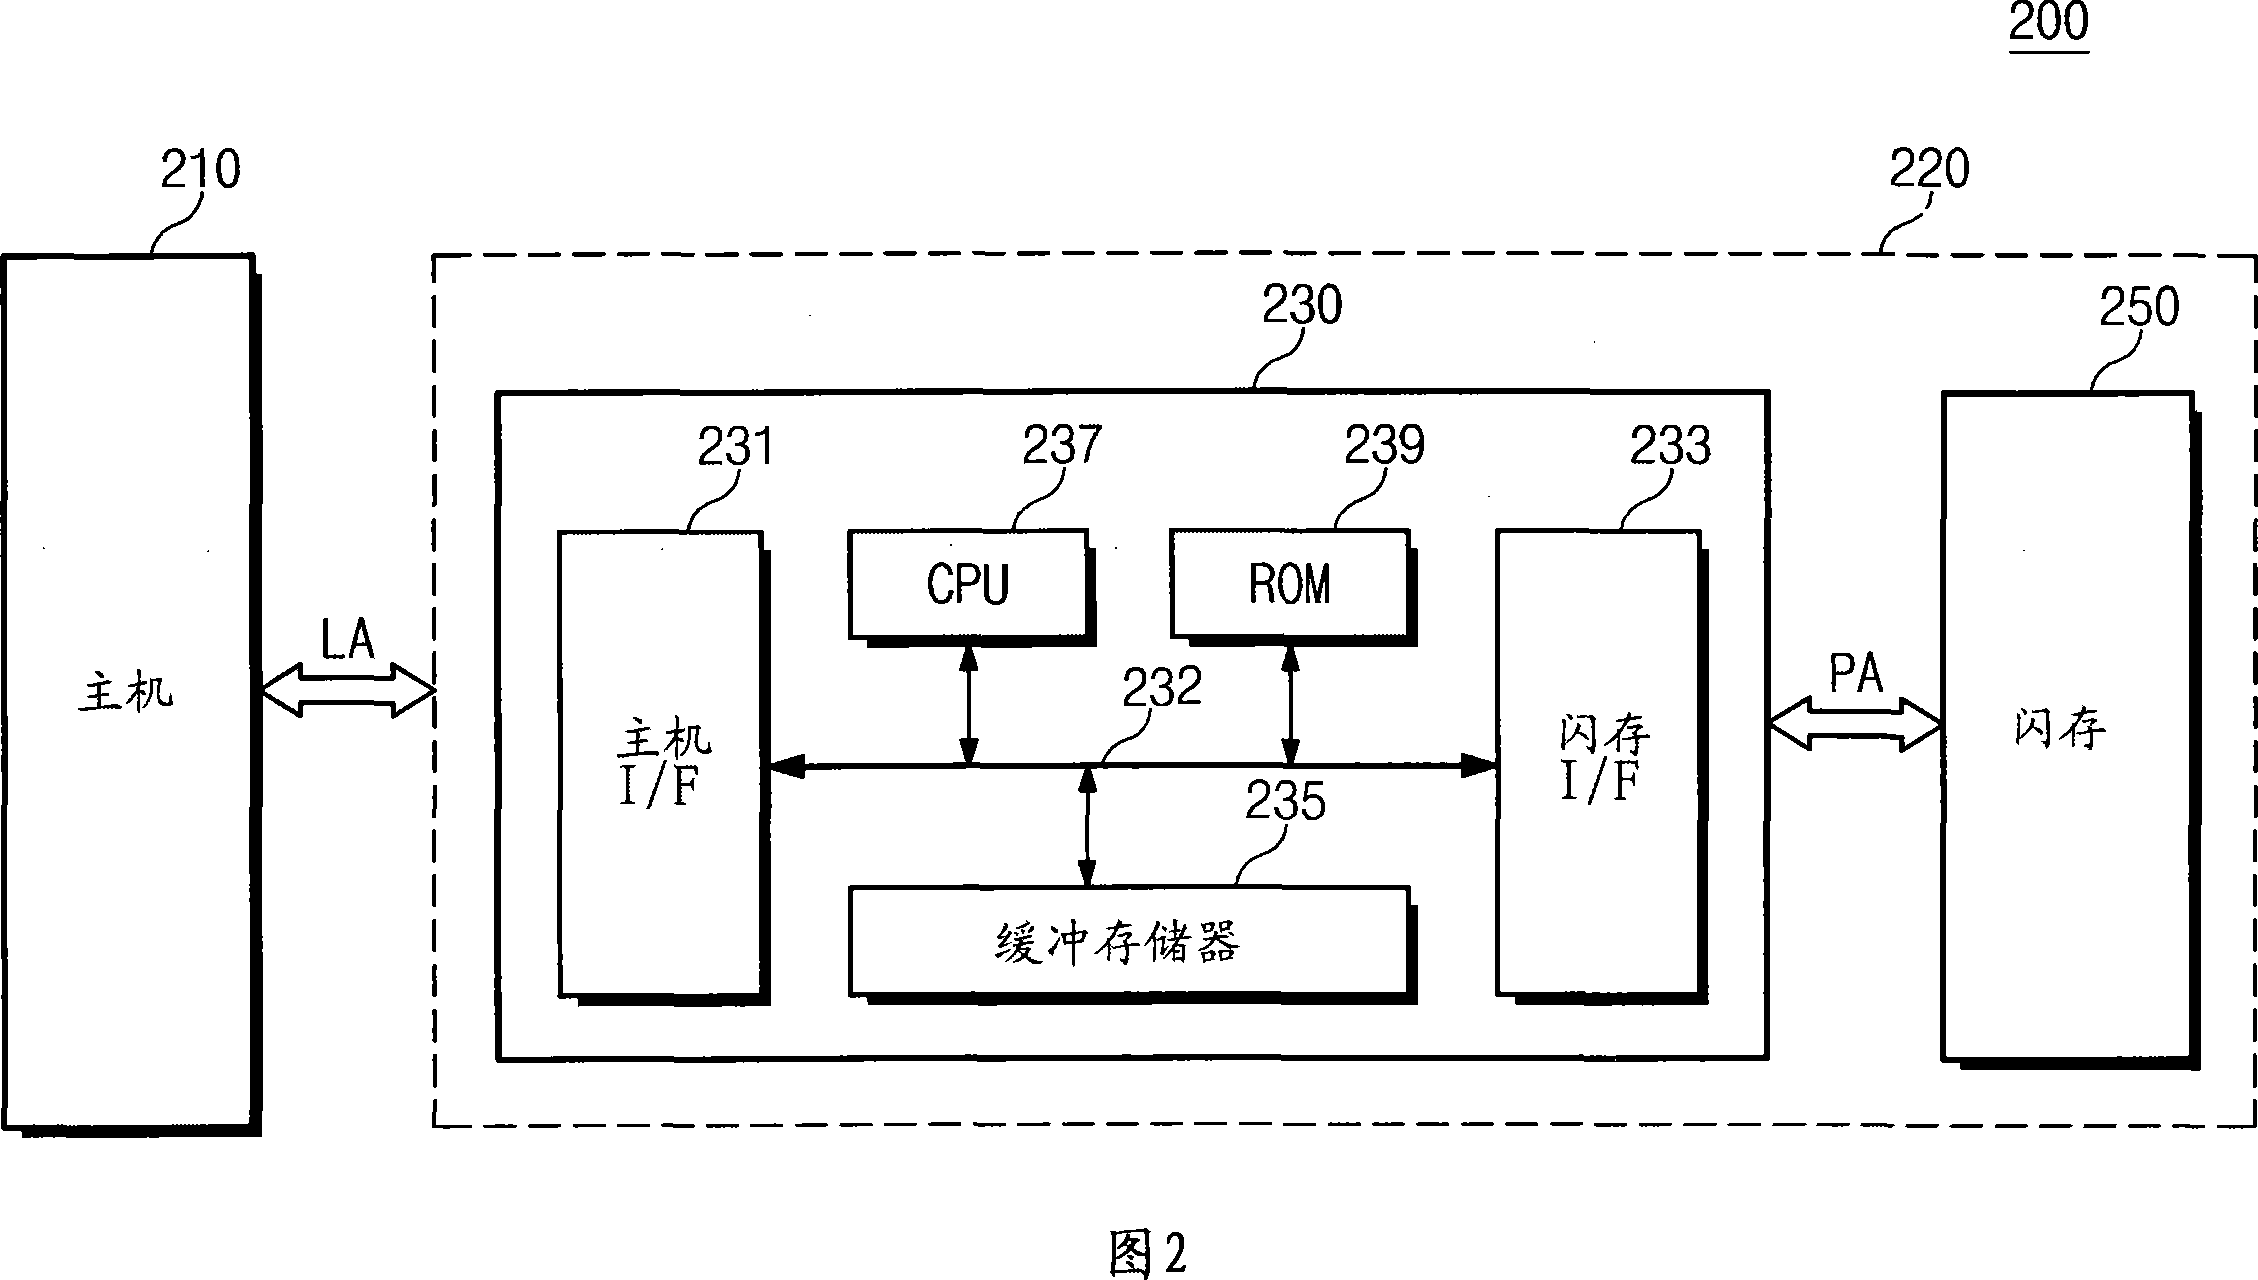 Memory mapping system and method